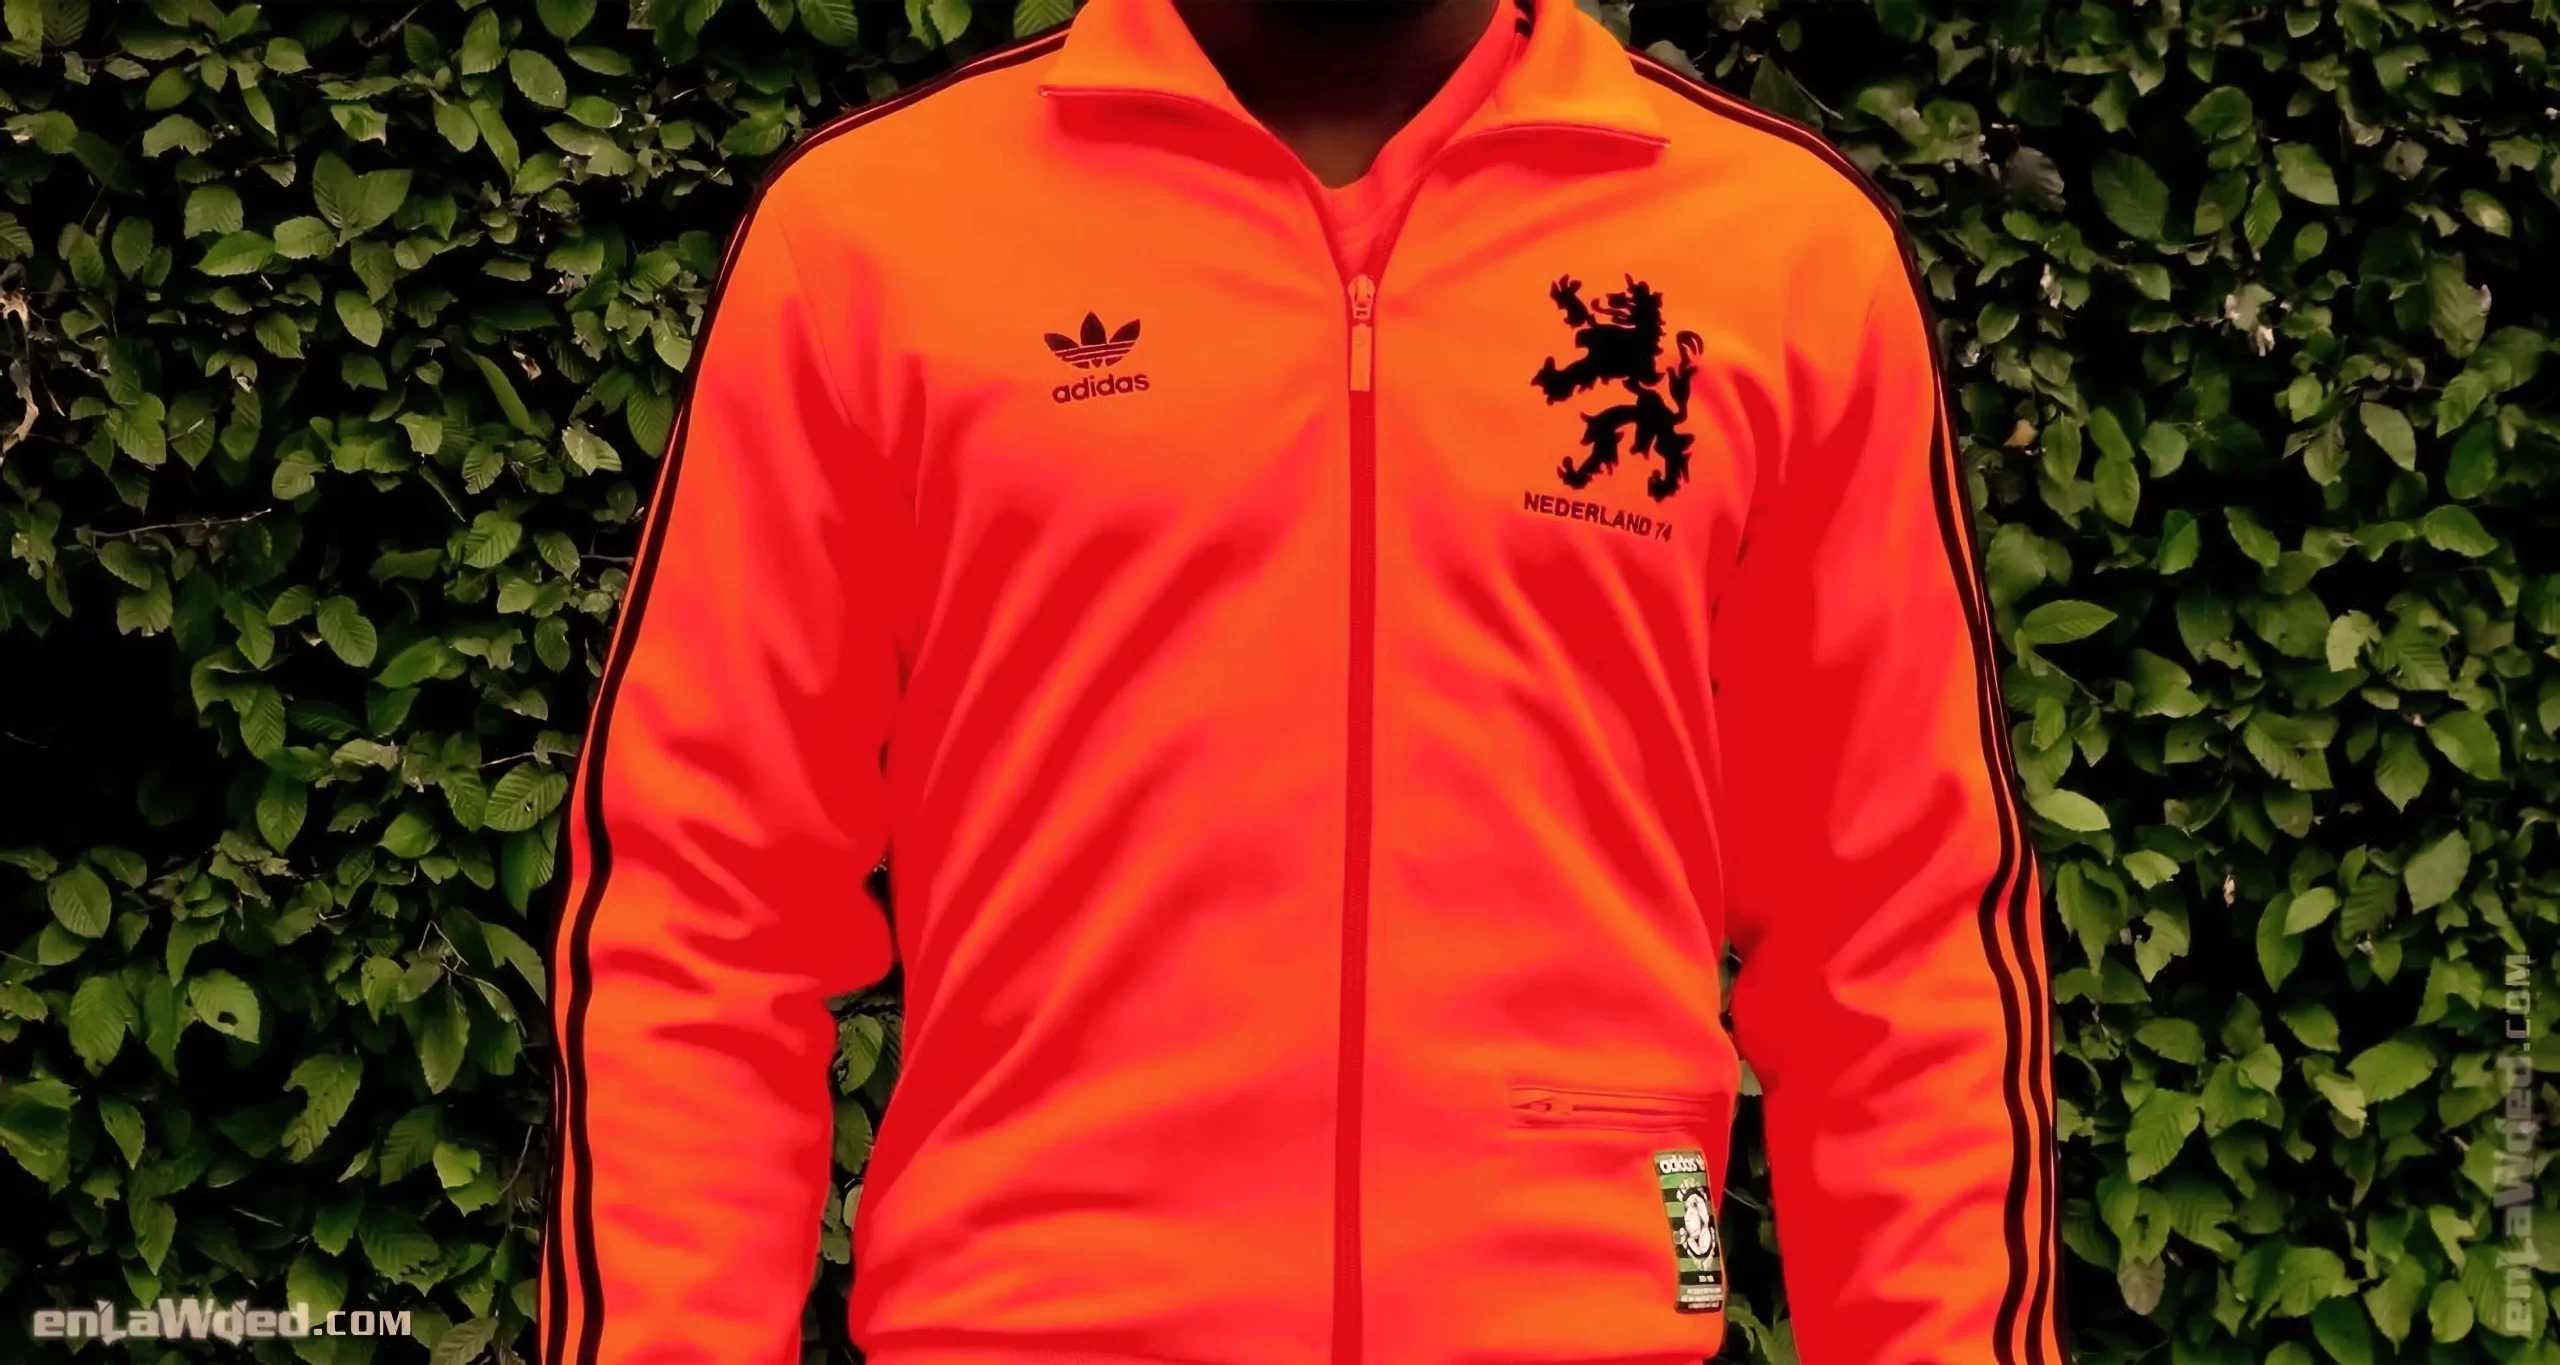 Men’s 2005 Netherlands ’74 Total Football TT by Adidas: Conscientious (EnLawded.com file #lmc47ob294haum8eqyi)